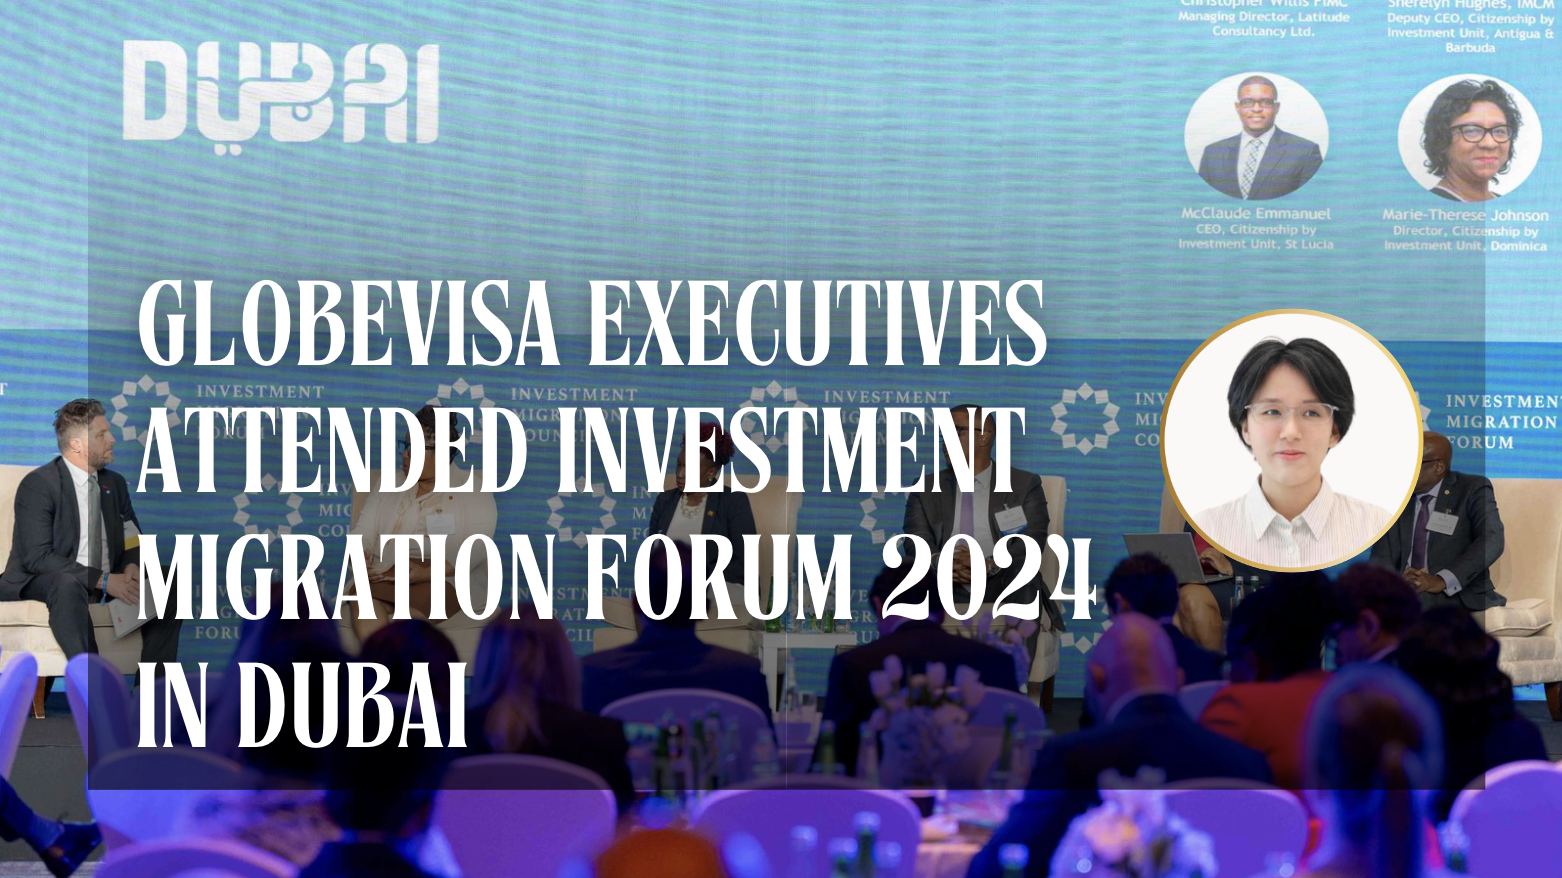 Globevisa Executives Attended Investment Migration Forum 2024 in Dubai